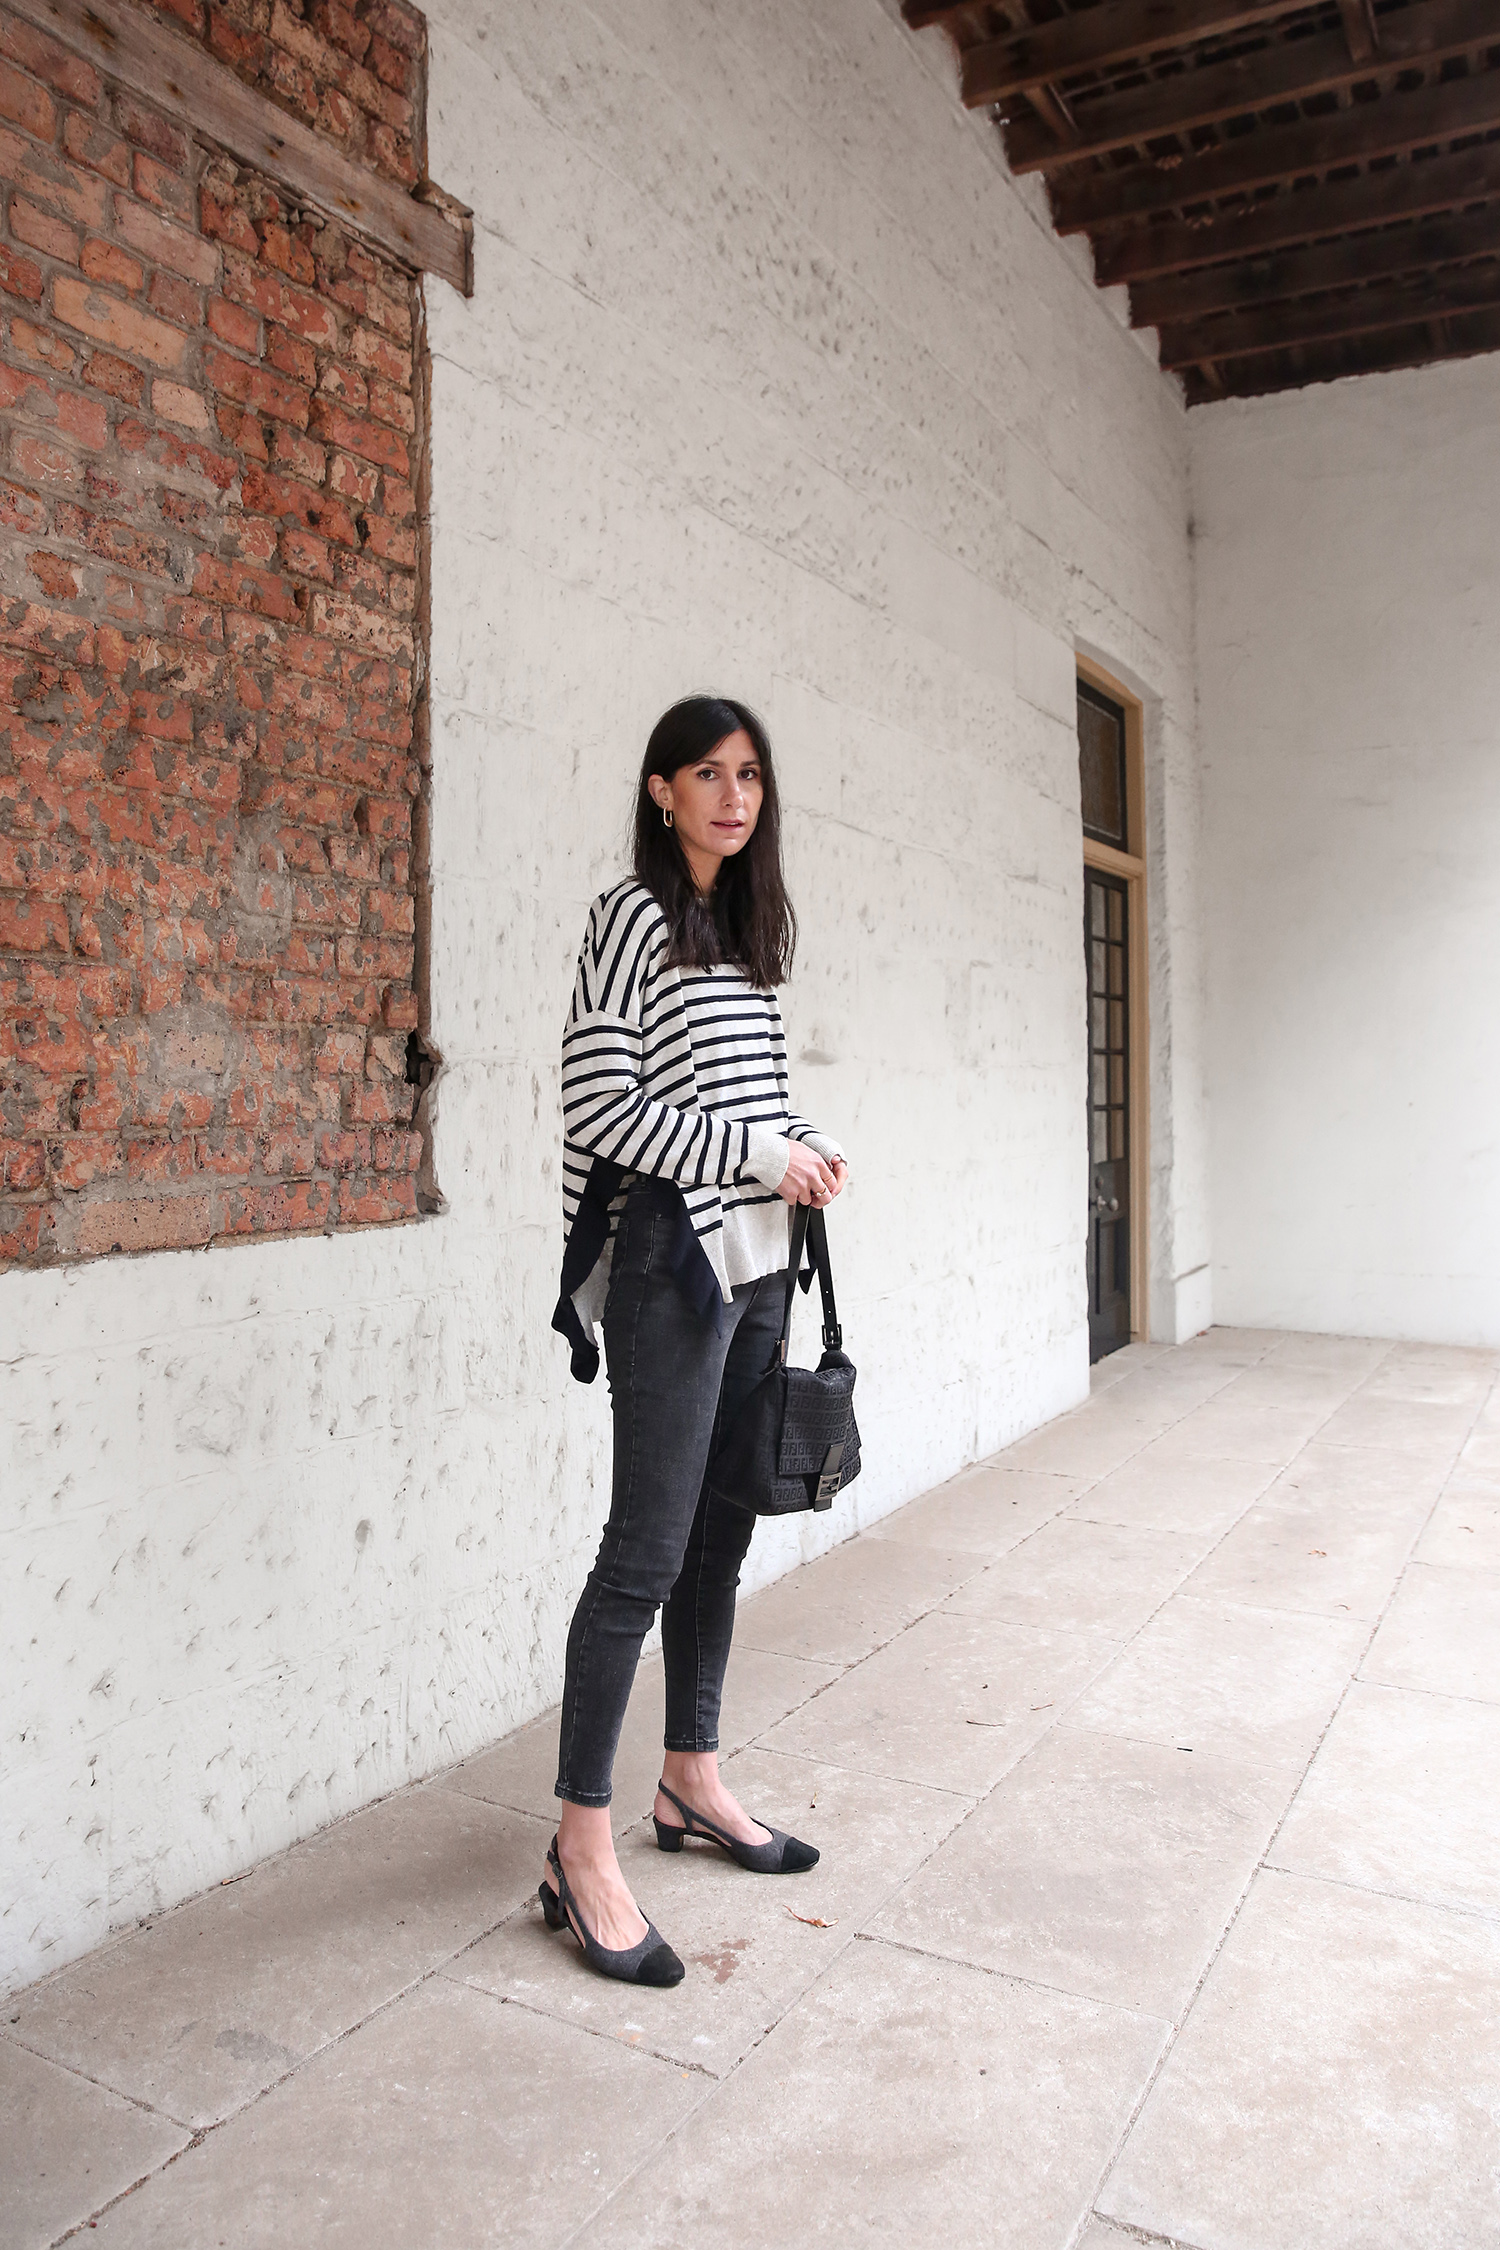 Alessandra Cashmere stripe top and Everlane authentic stretch skinny jeans